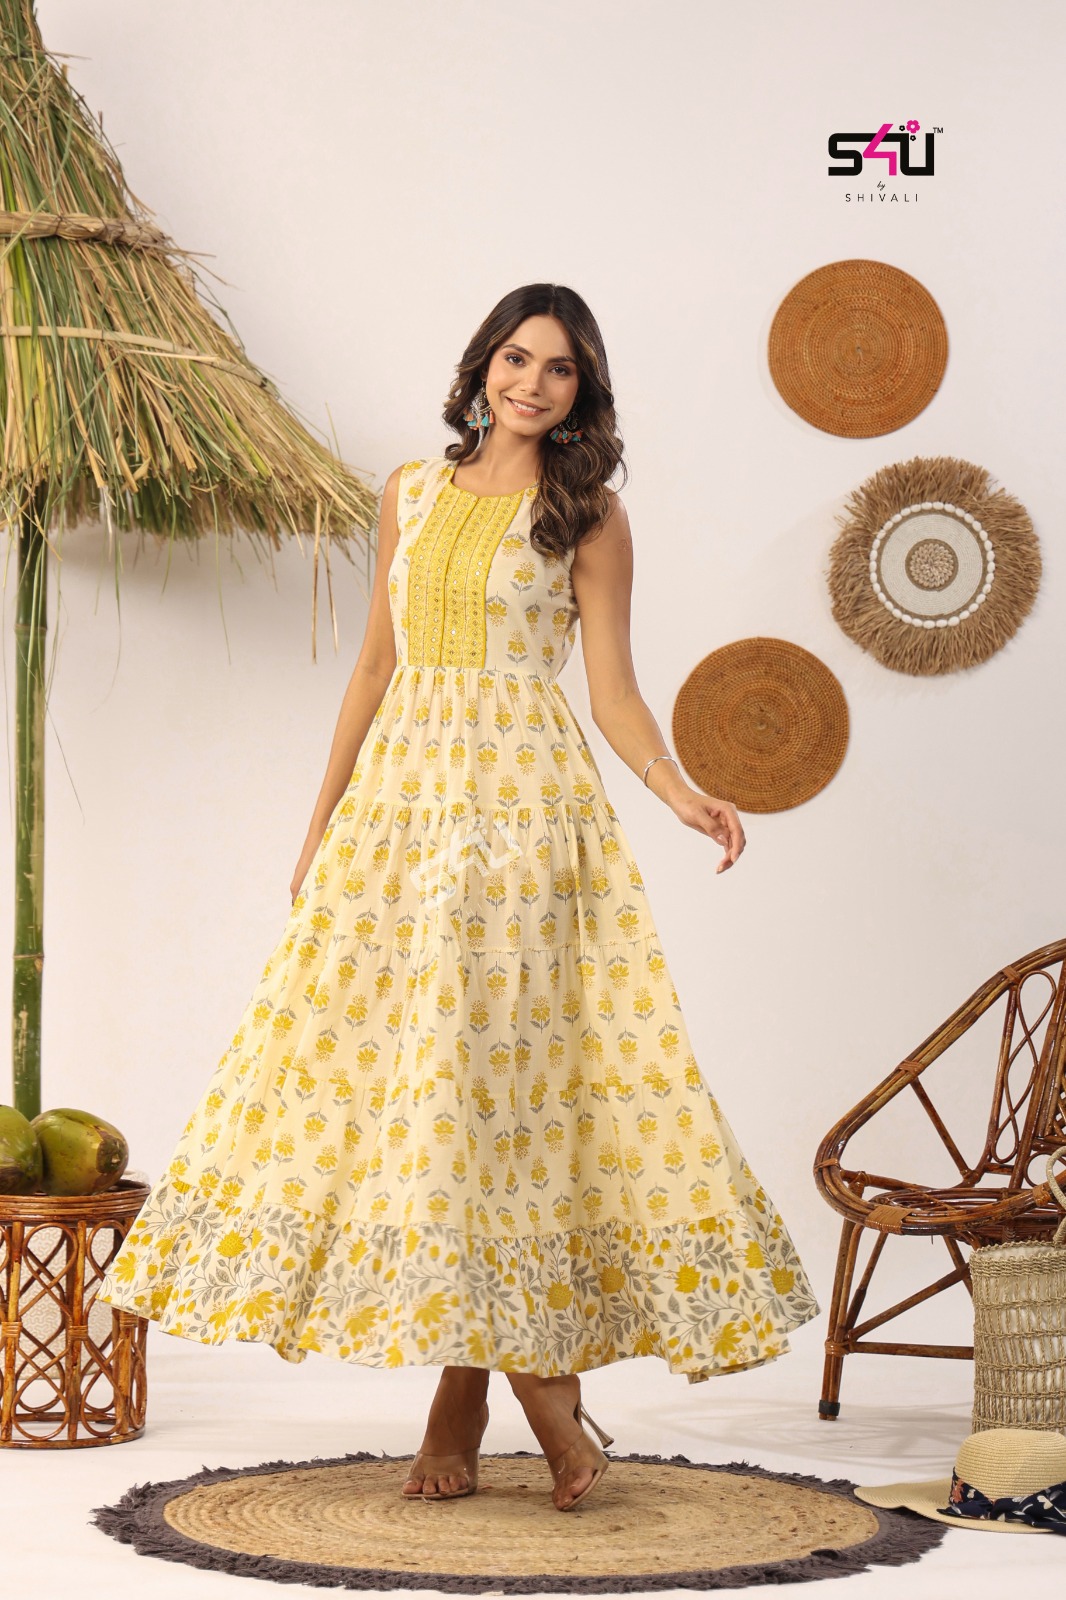 s4U Kurtis Flairy Tales vol 9 Gowns Catalog collection 1